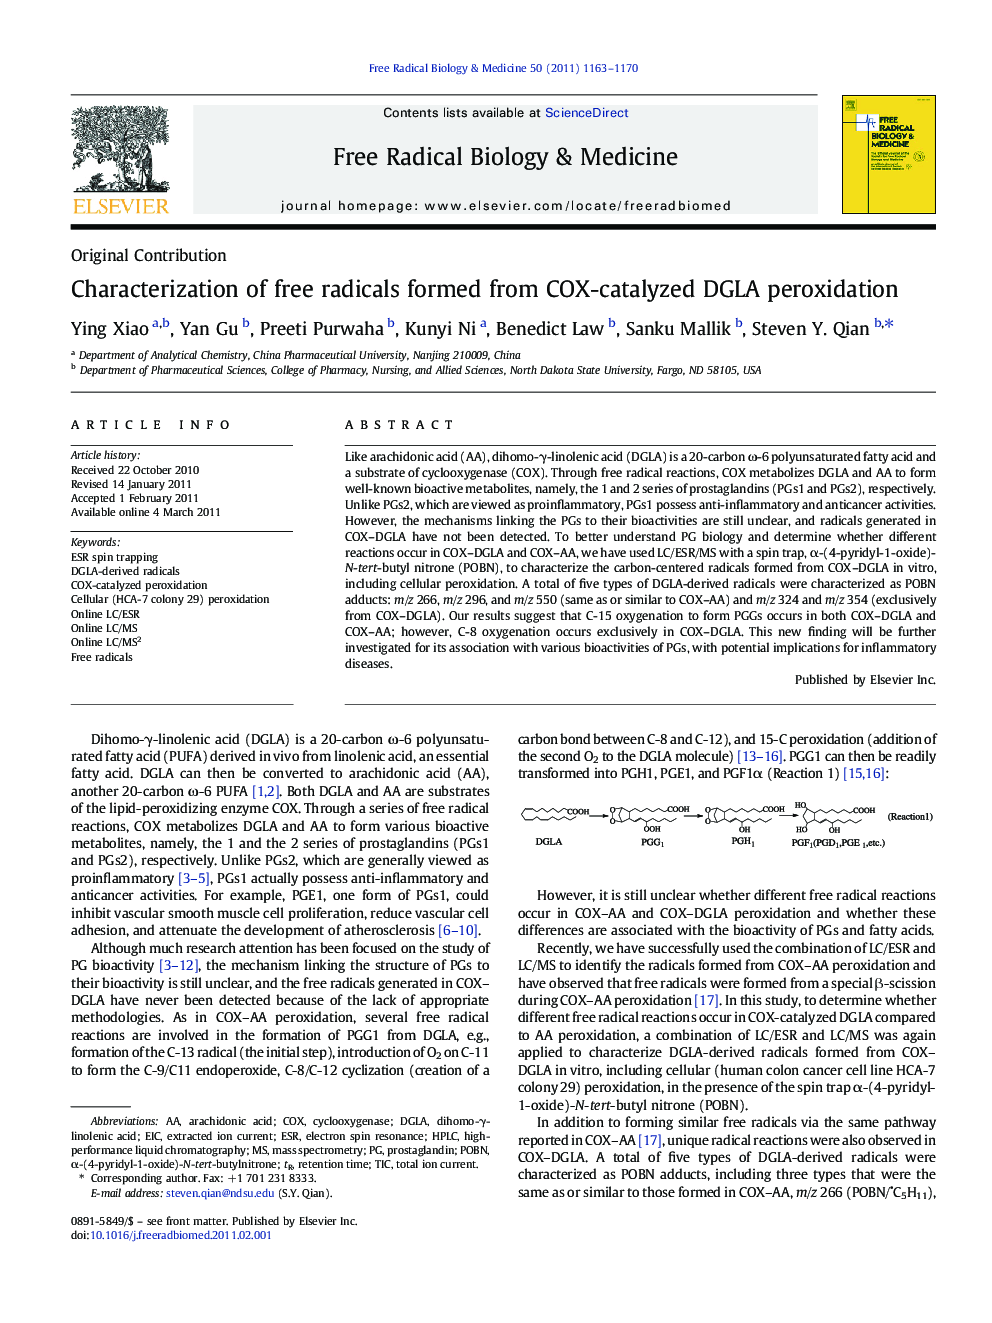 Characterization of free radicals formed from COX-catalyzed DGLA peroxidation